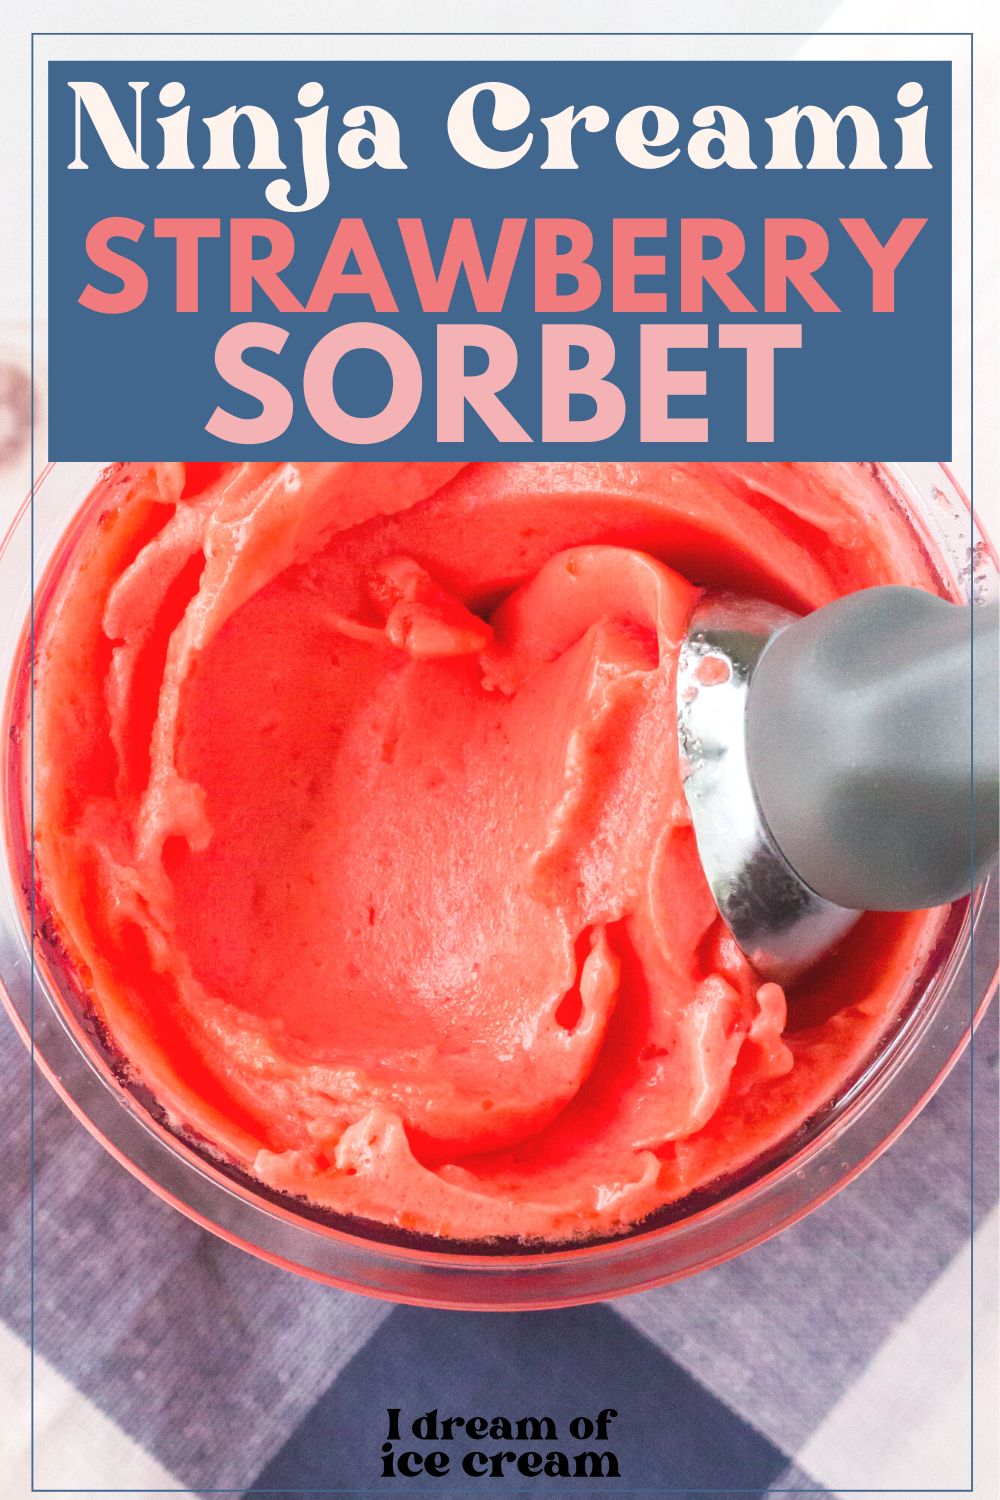 overhead view of a Ninja Creami pint container of strawberry sorbet made with Jell-O gelatin.